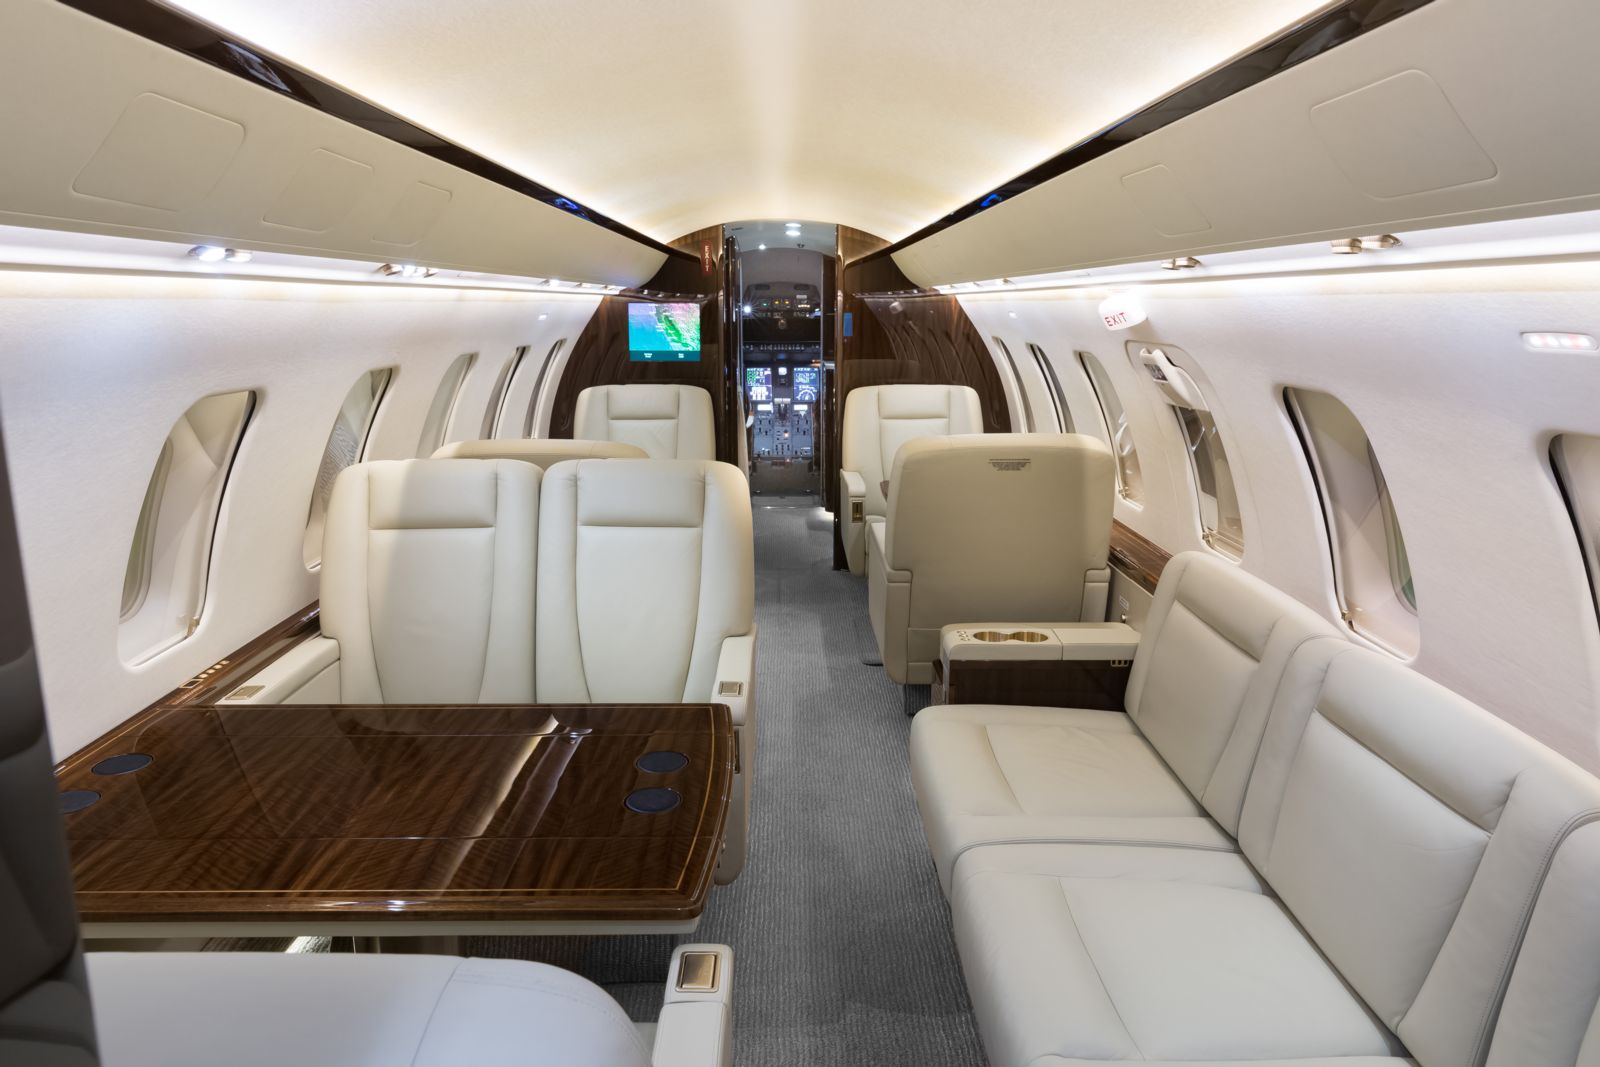 Bombardier CL 605  S/N 5754 for sale | gallery image: /userfiles/images/CL605_sn5754/bfp_9771grey.jpg